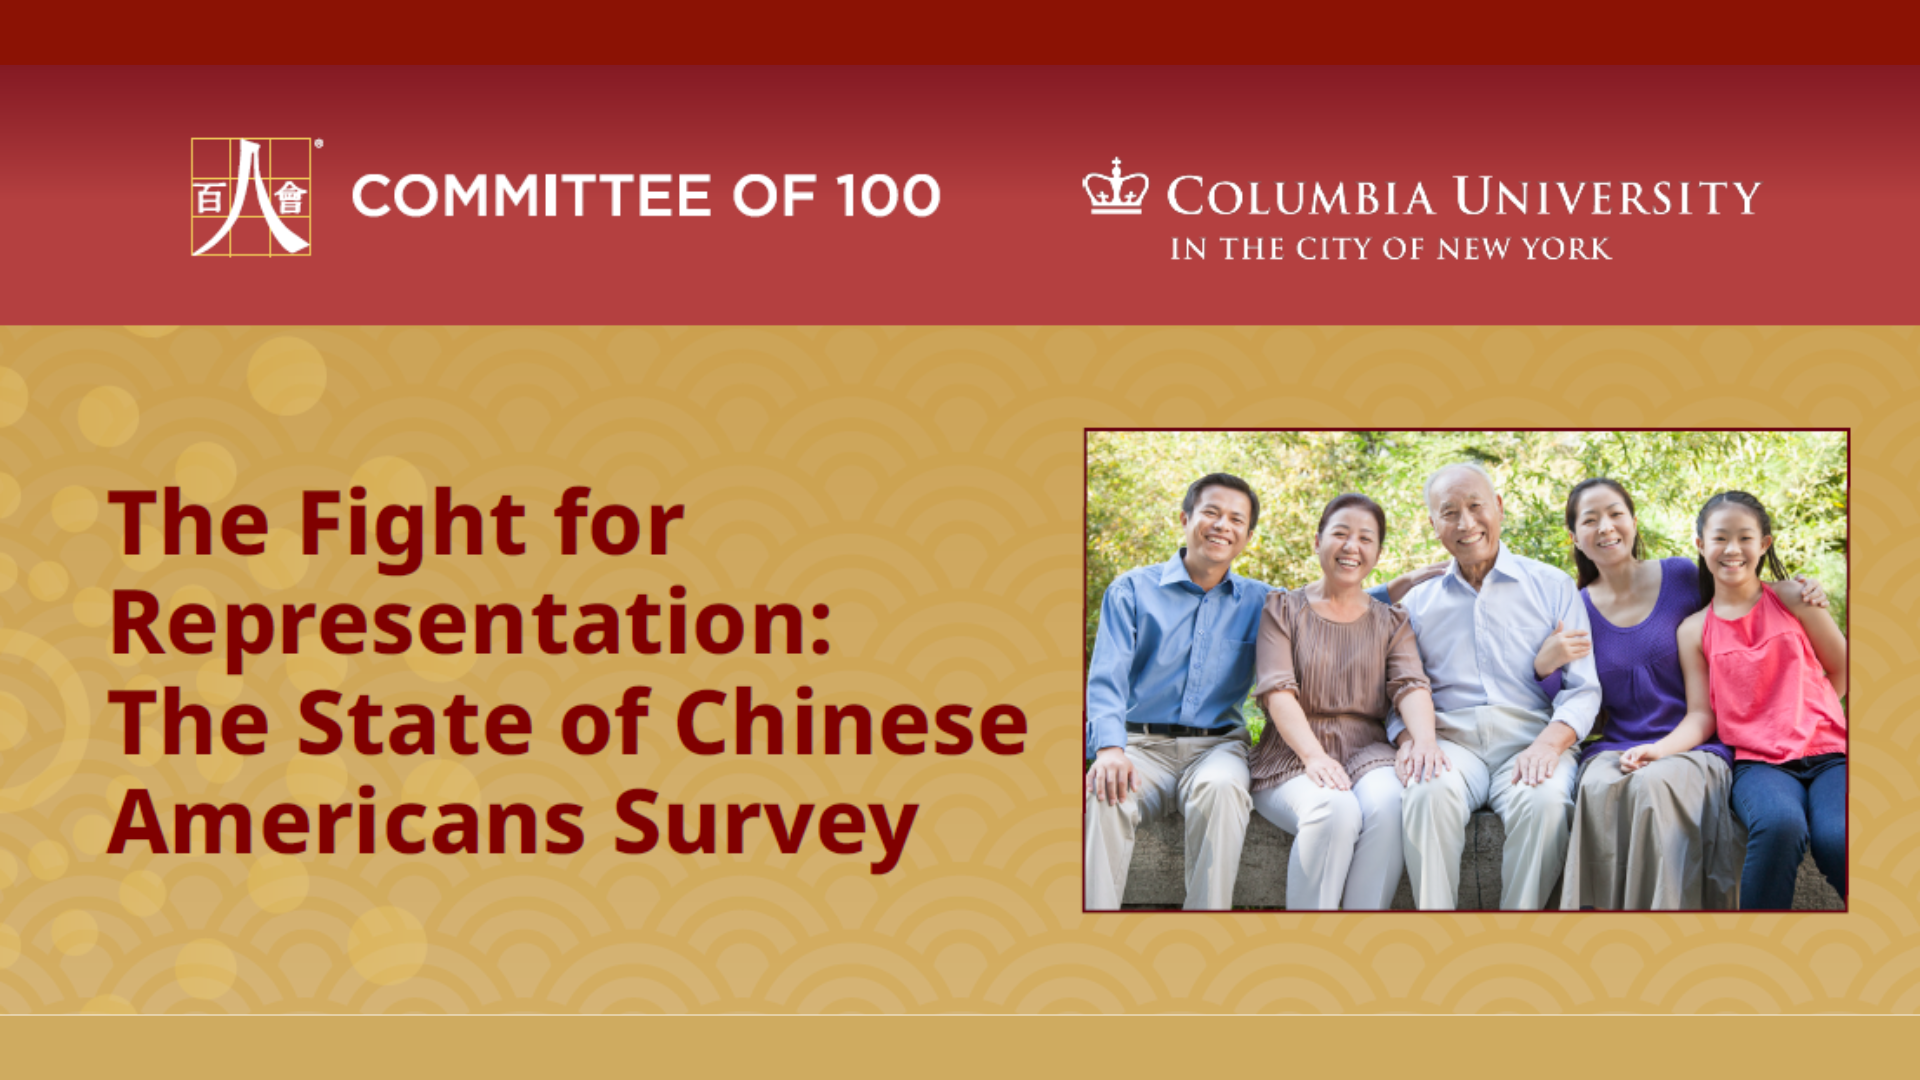 The Fight for Representation: The State of Chinese Americans Survey